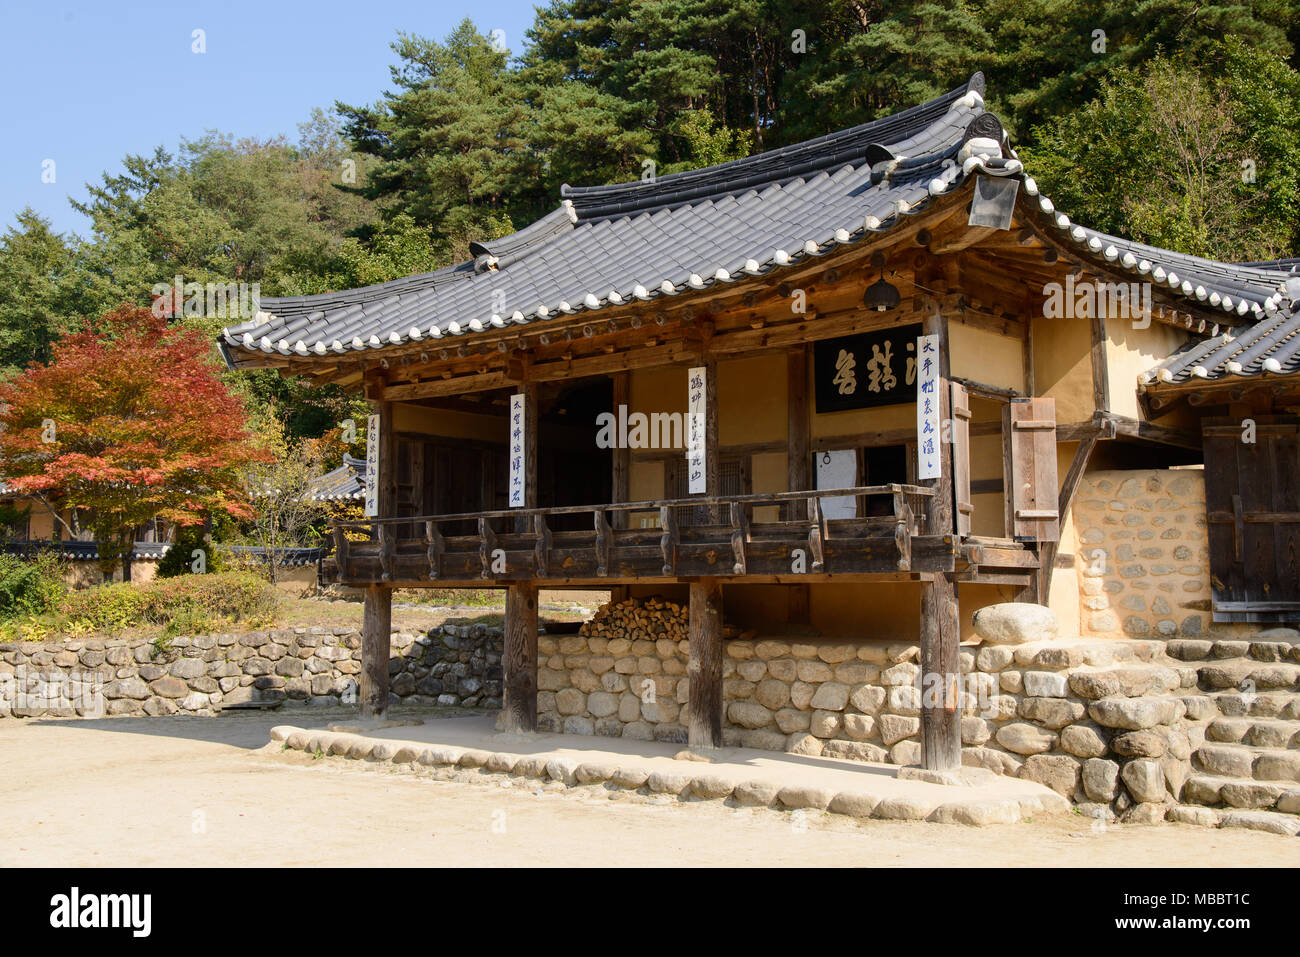 YEONGJU, KOREA - OCTOBER 15, 2014: Whole view of Indong Jang family old house in Seonbichon old town. Stock Photo